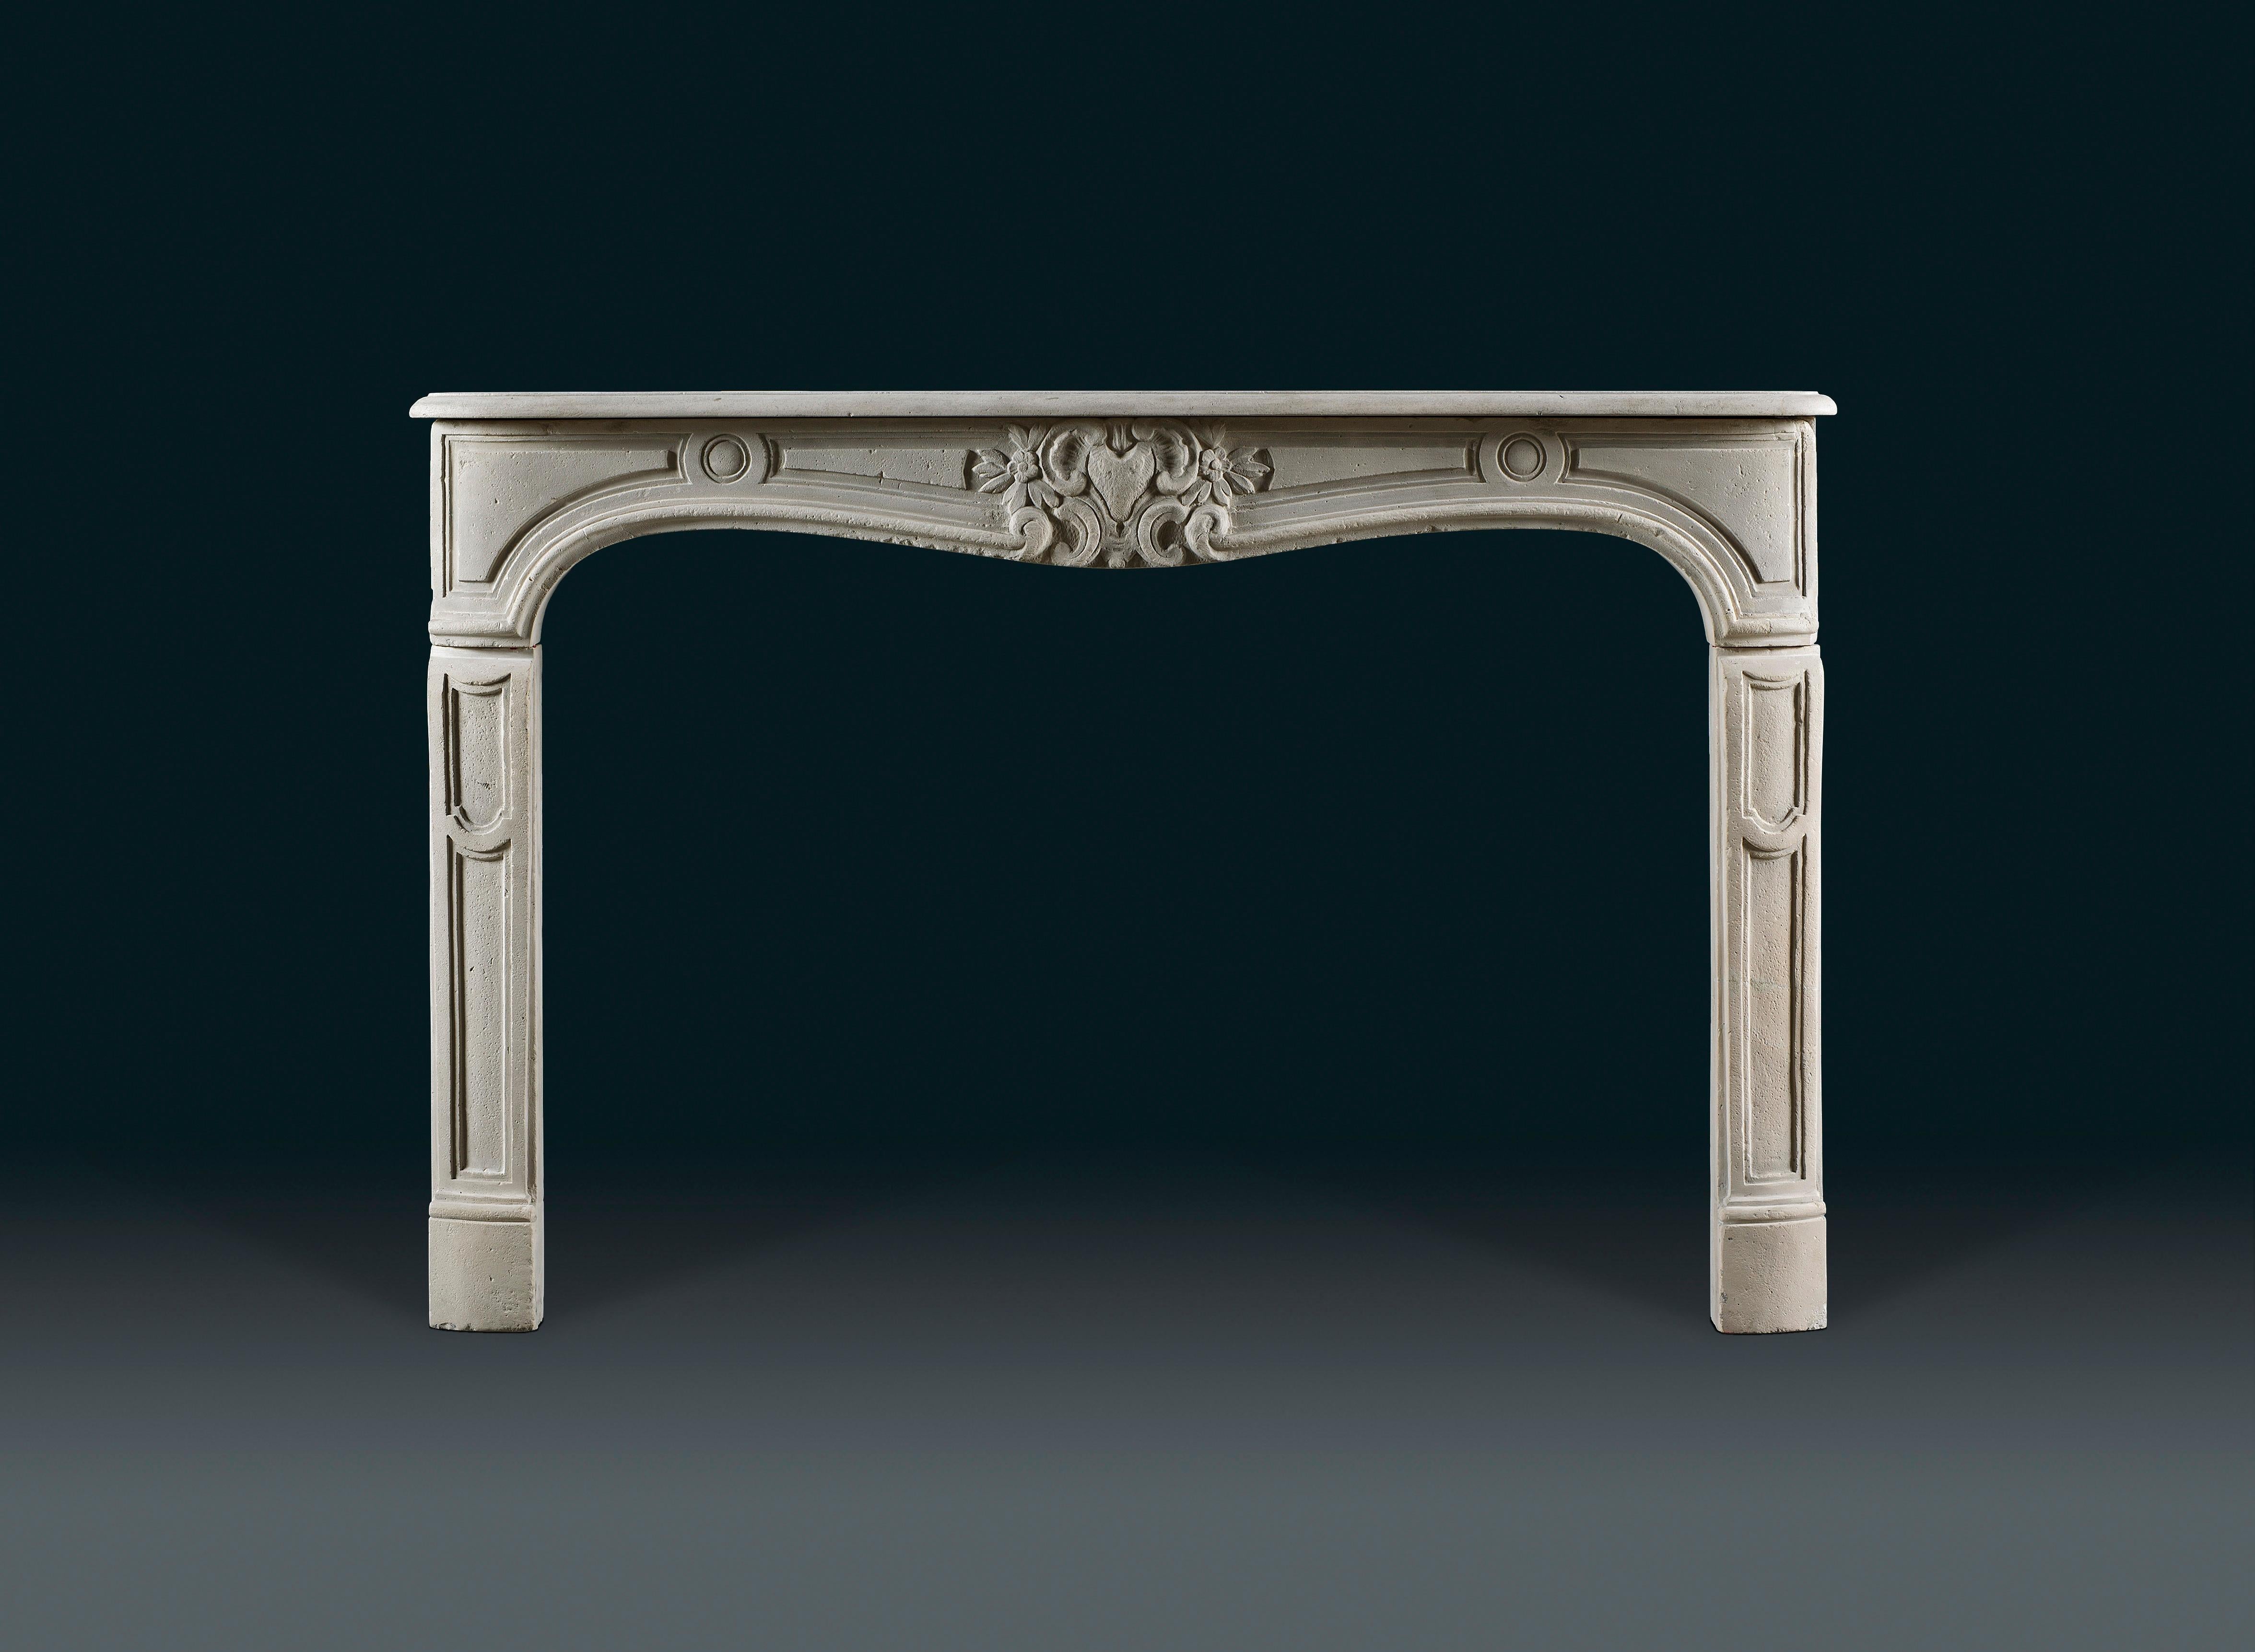 With serpentine shelf and frieze, which is centred with a foxes’ head surrounded by “C” scrolls and flowering foliage, flanked by cartouches and circular paterae, 19th century.